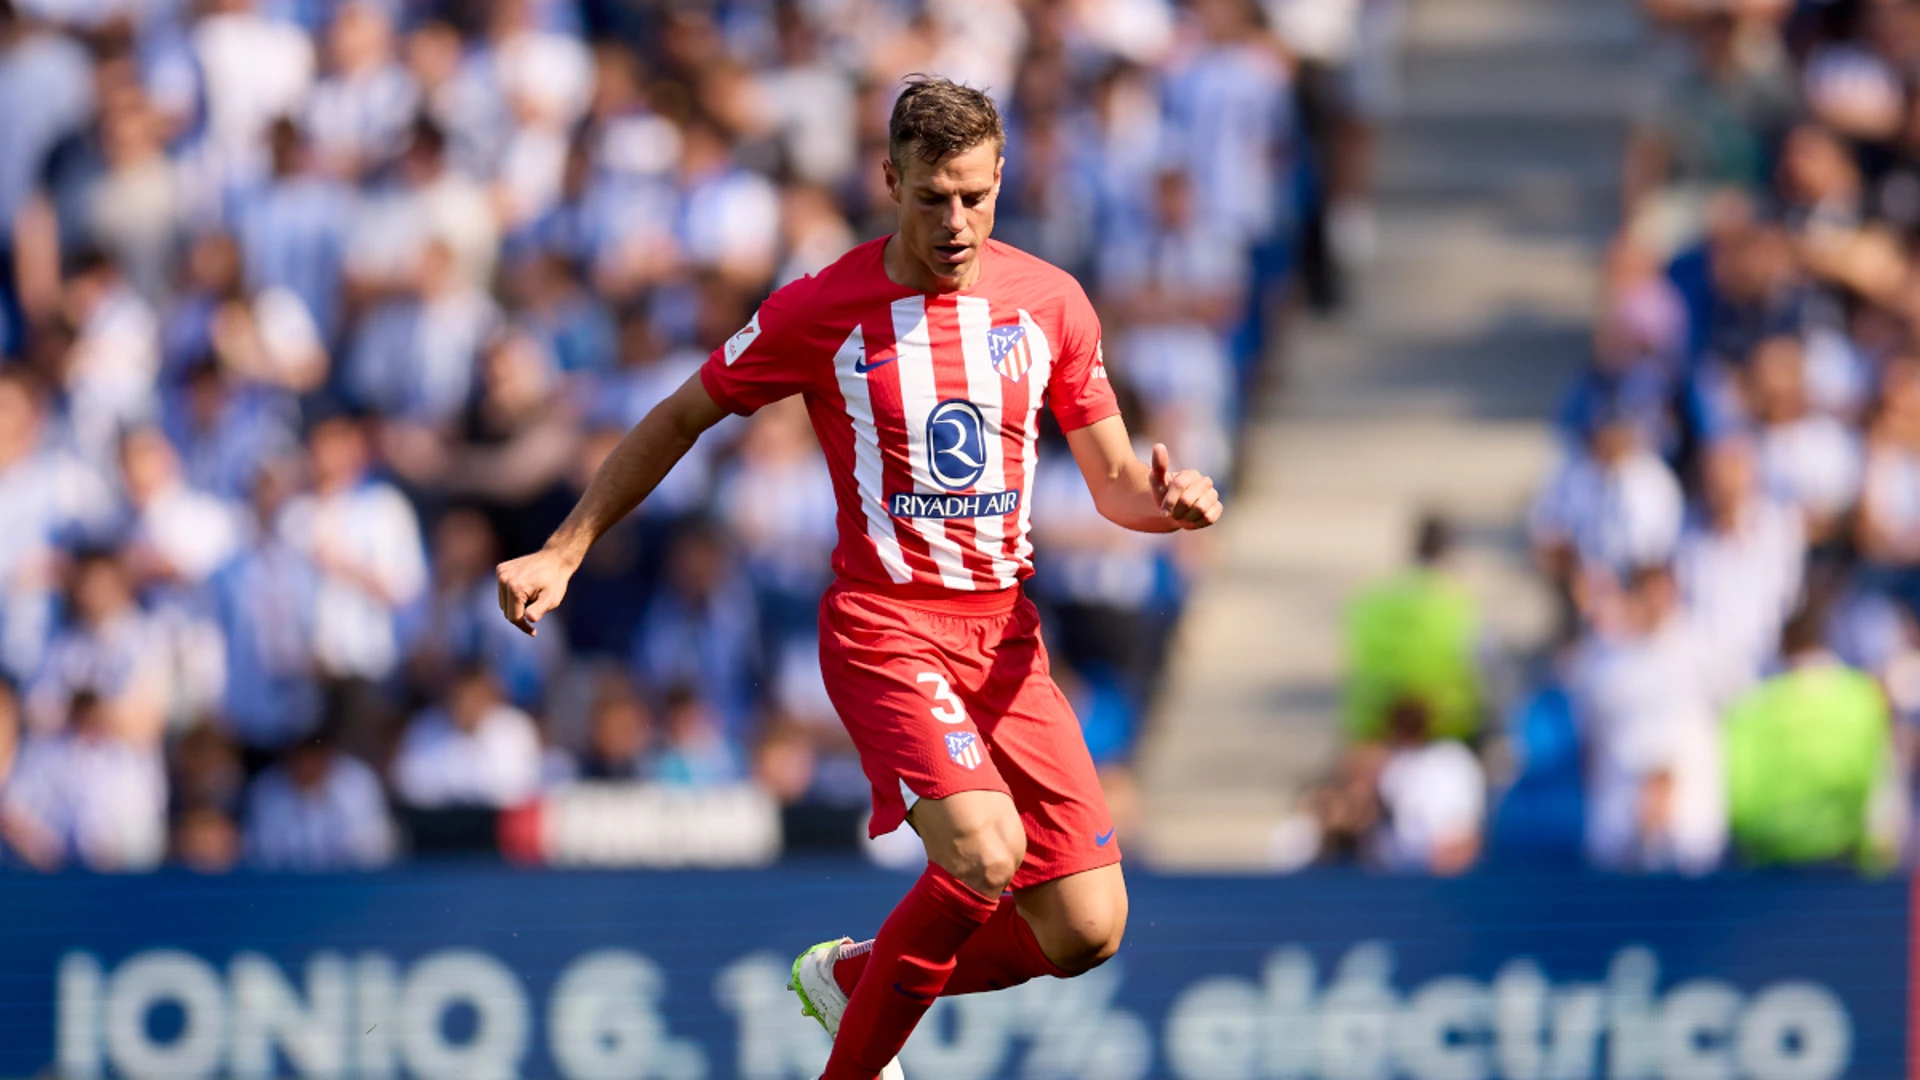 Azpilicueta extends stay at Atletico Madrid as Depay leaves